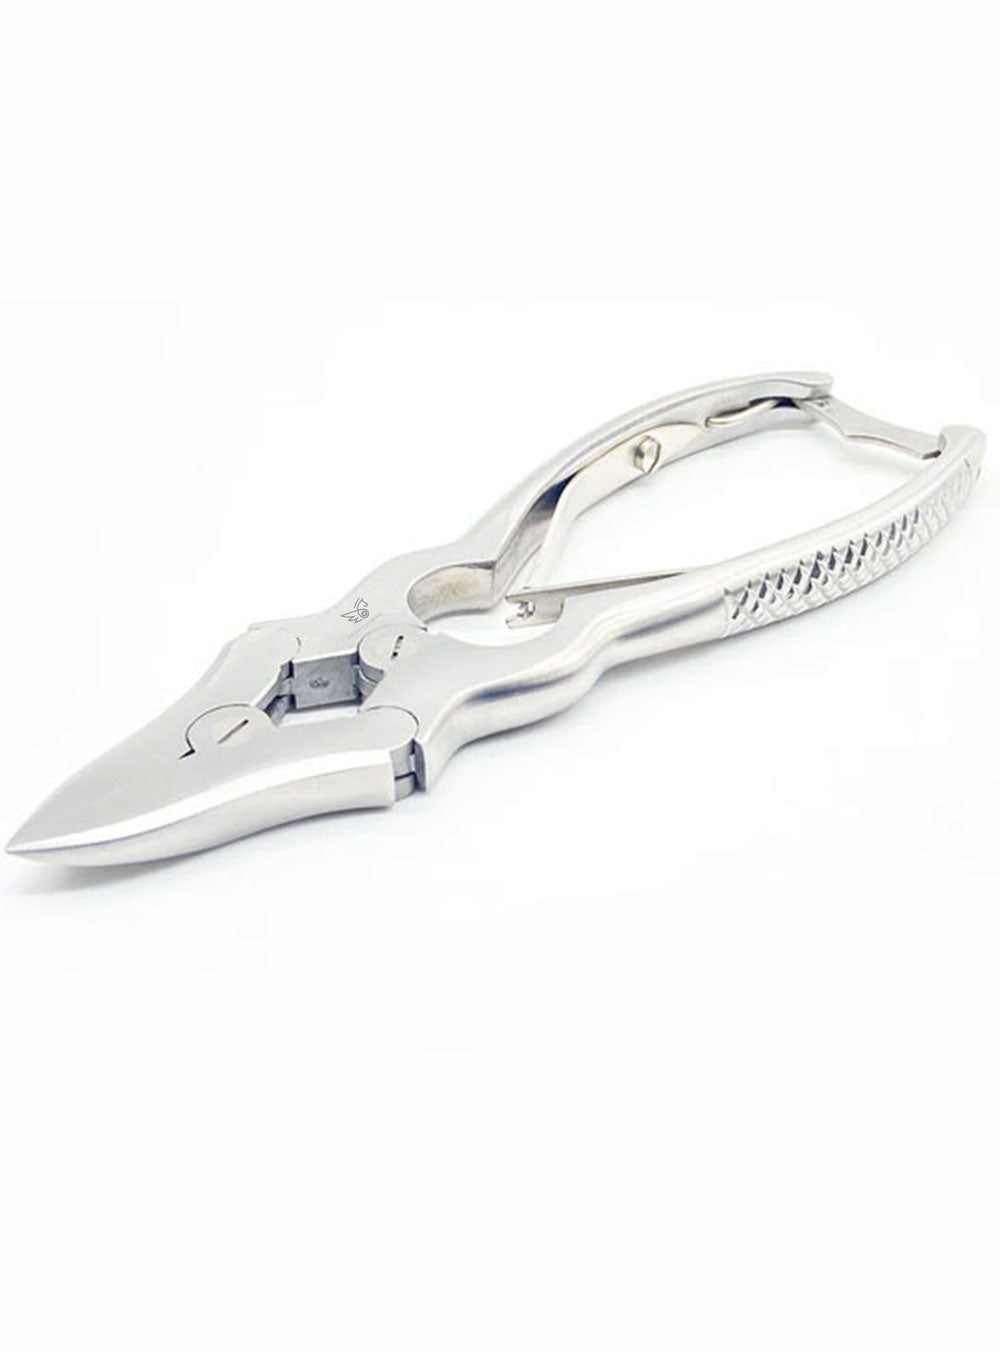 Cantilever Nipper | Straight Blade Chiropody Instruments